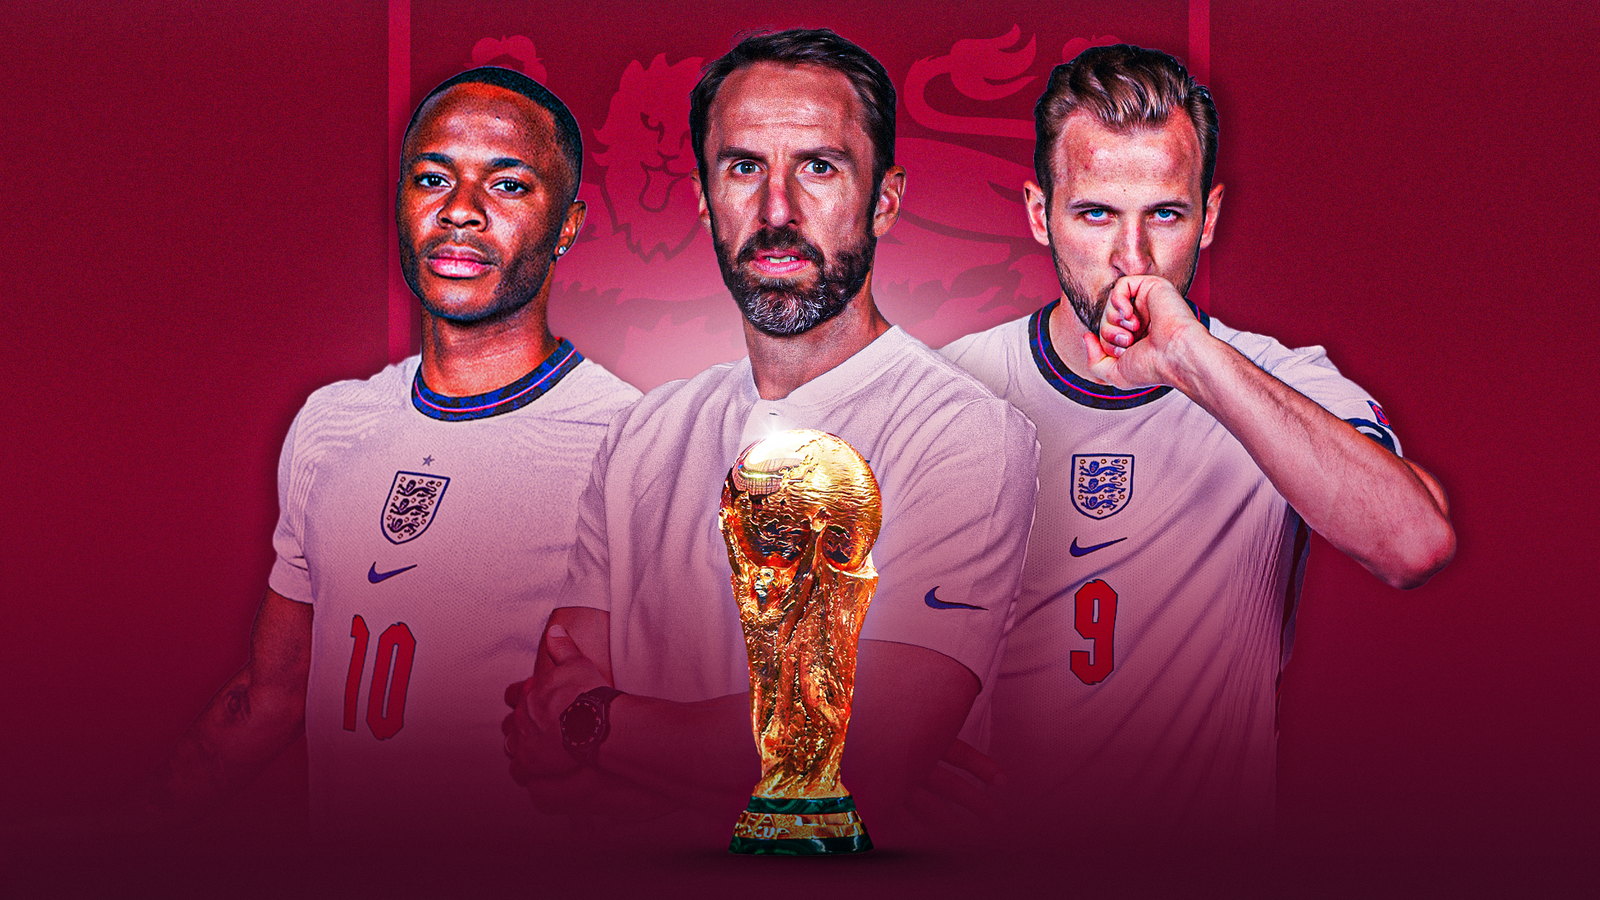 England's World Cup group opponents have been revealed